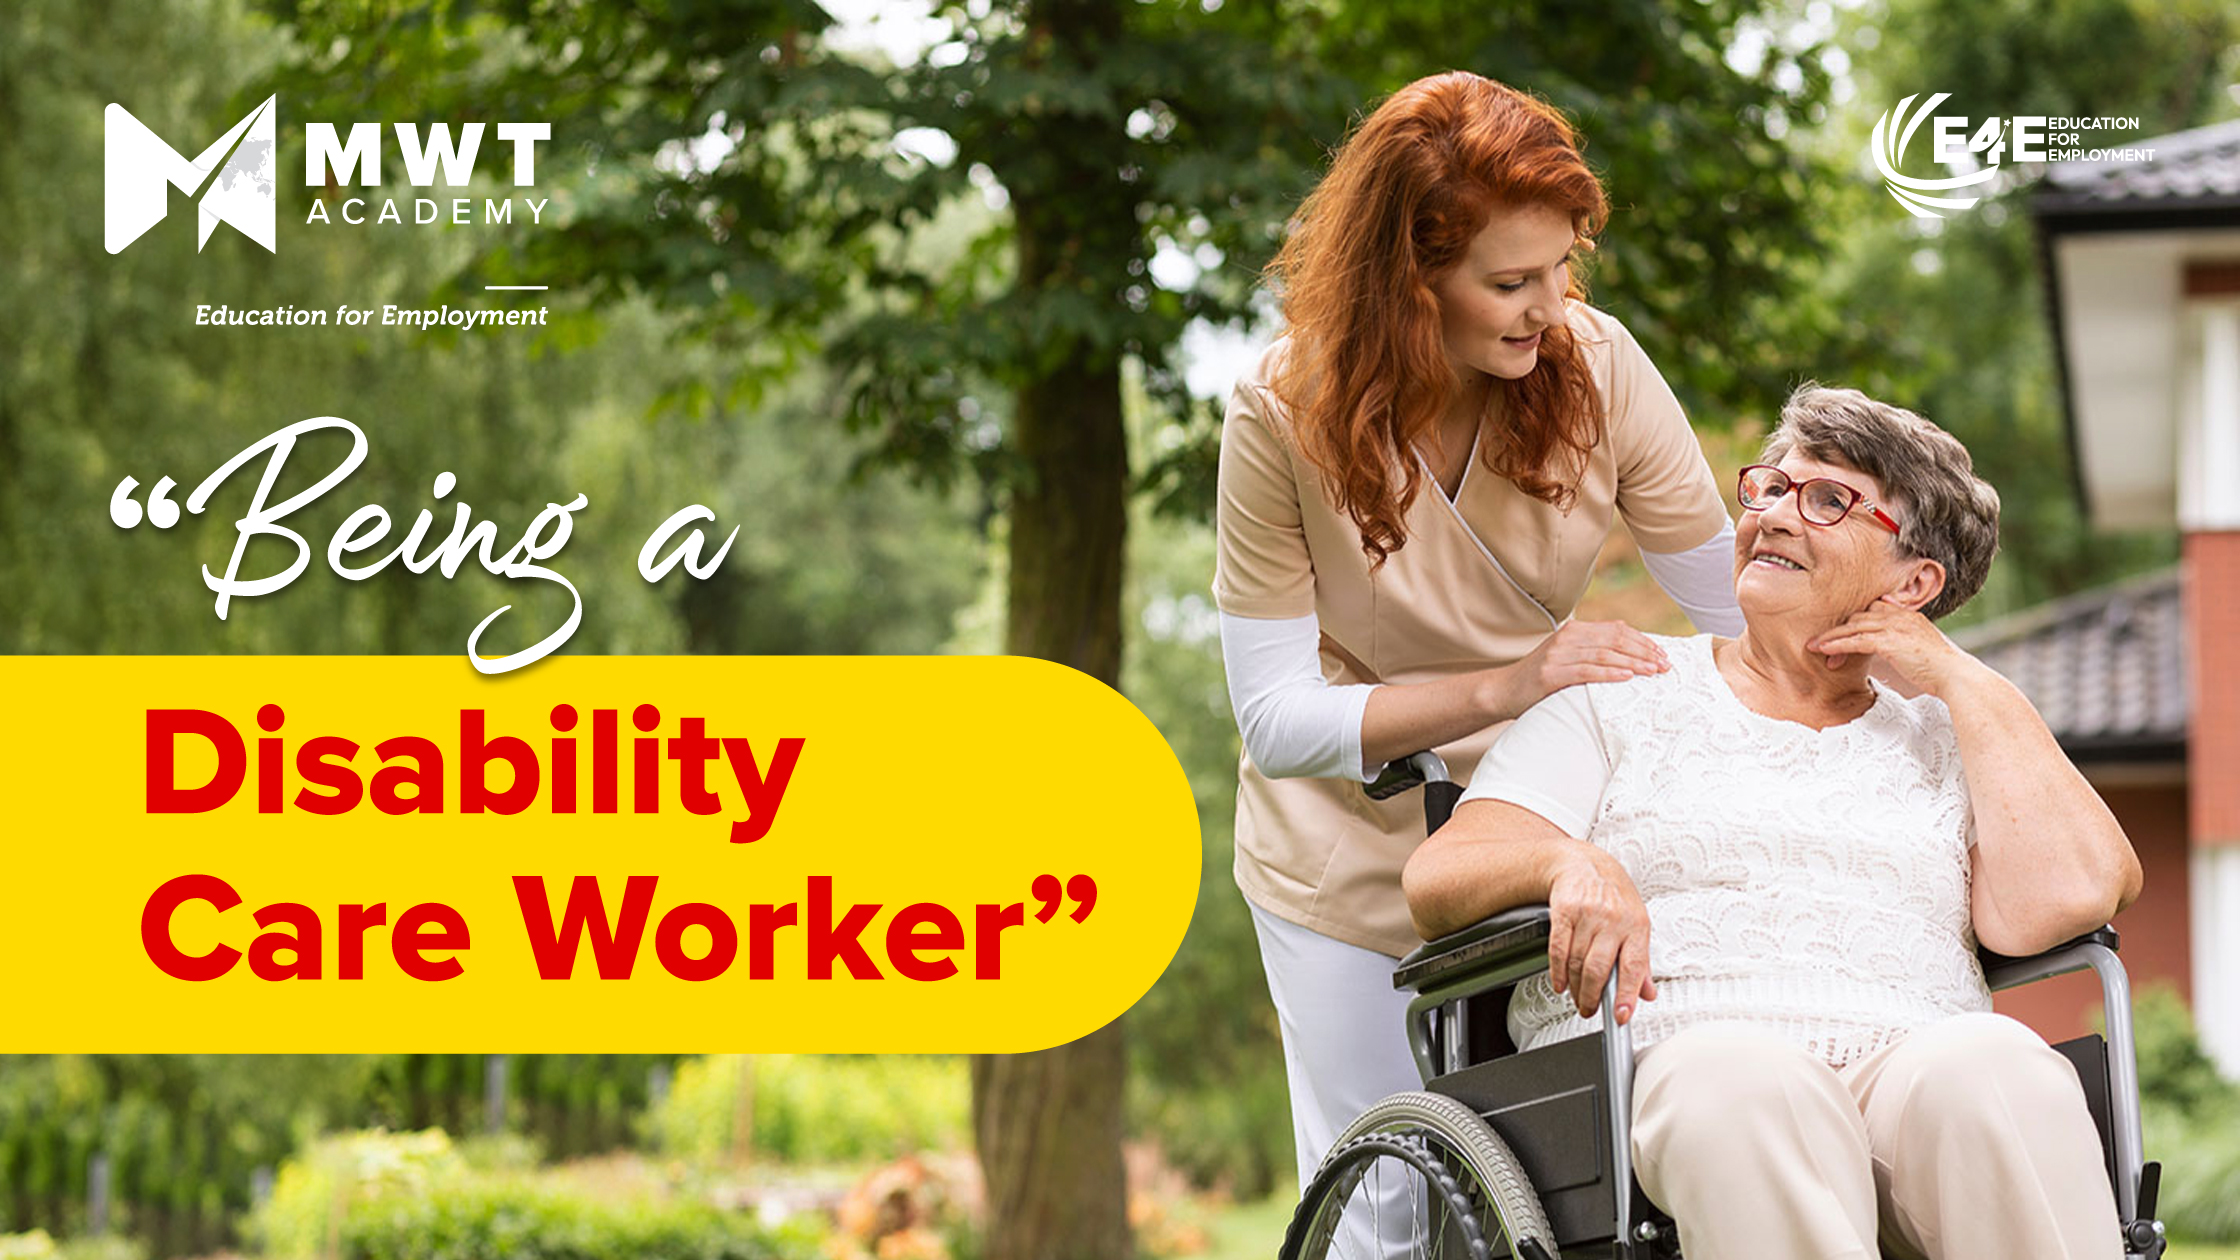 What’s it like to be a Disability Care Worker